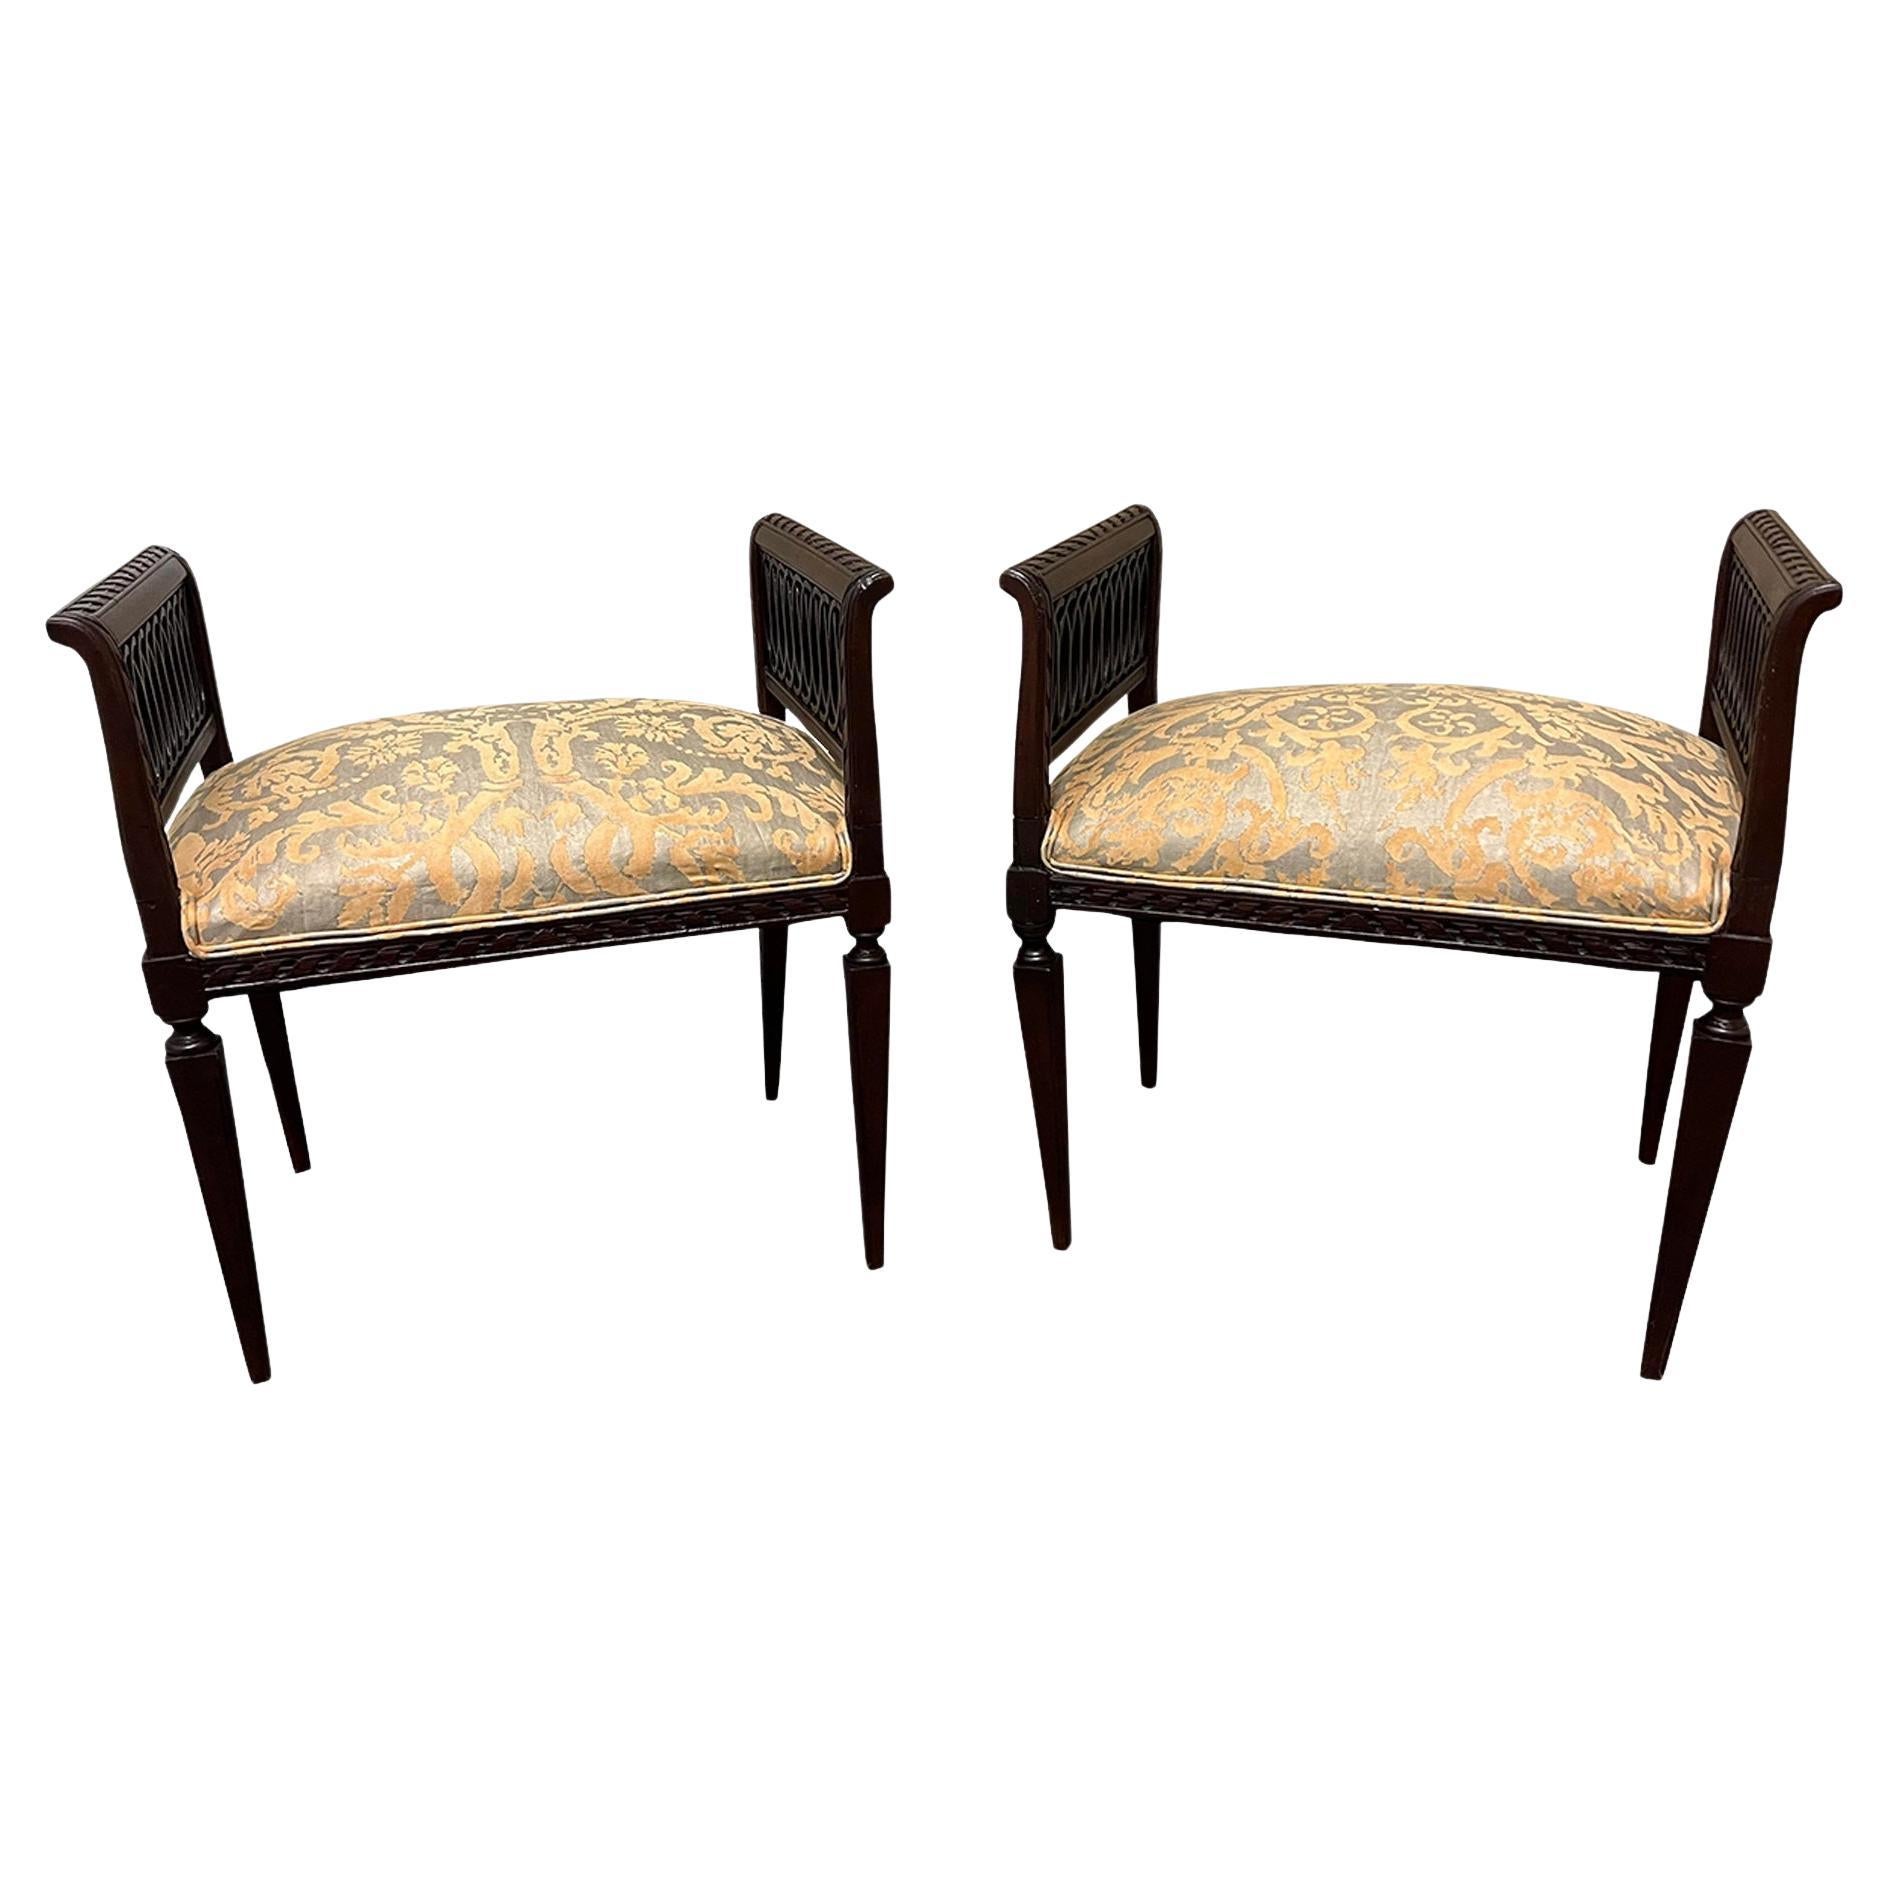 Pair, 19th Century French Louis XVI Carved Stools in Mariano Fortuny Upholstery